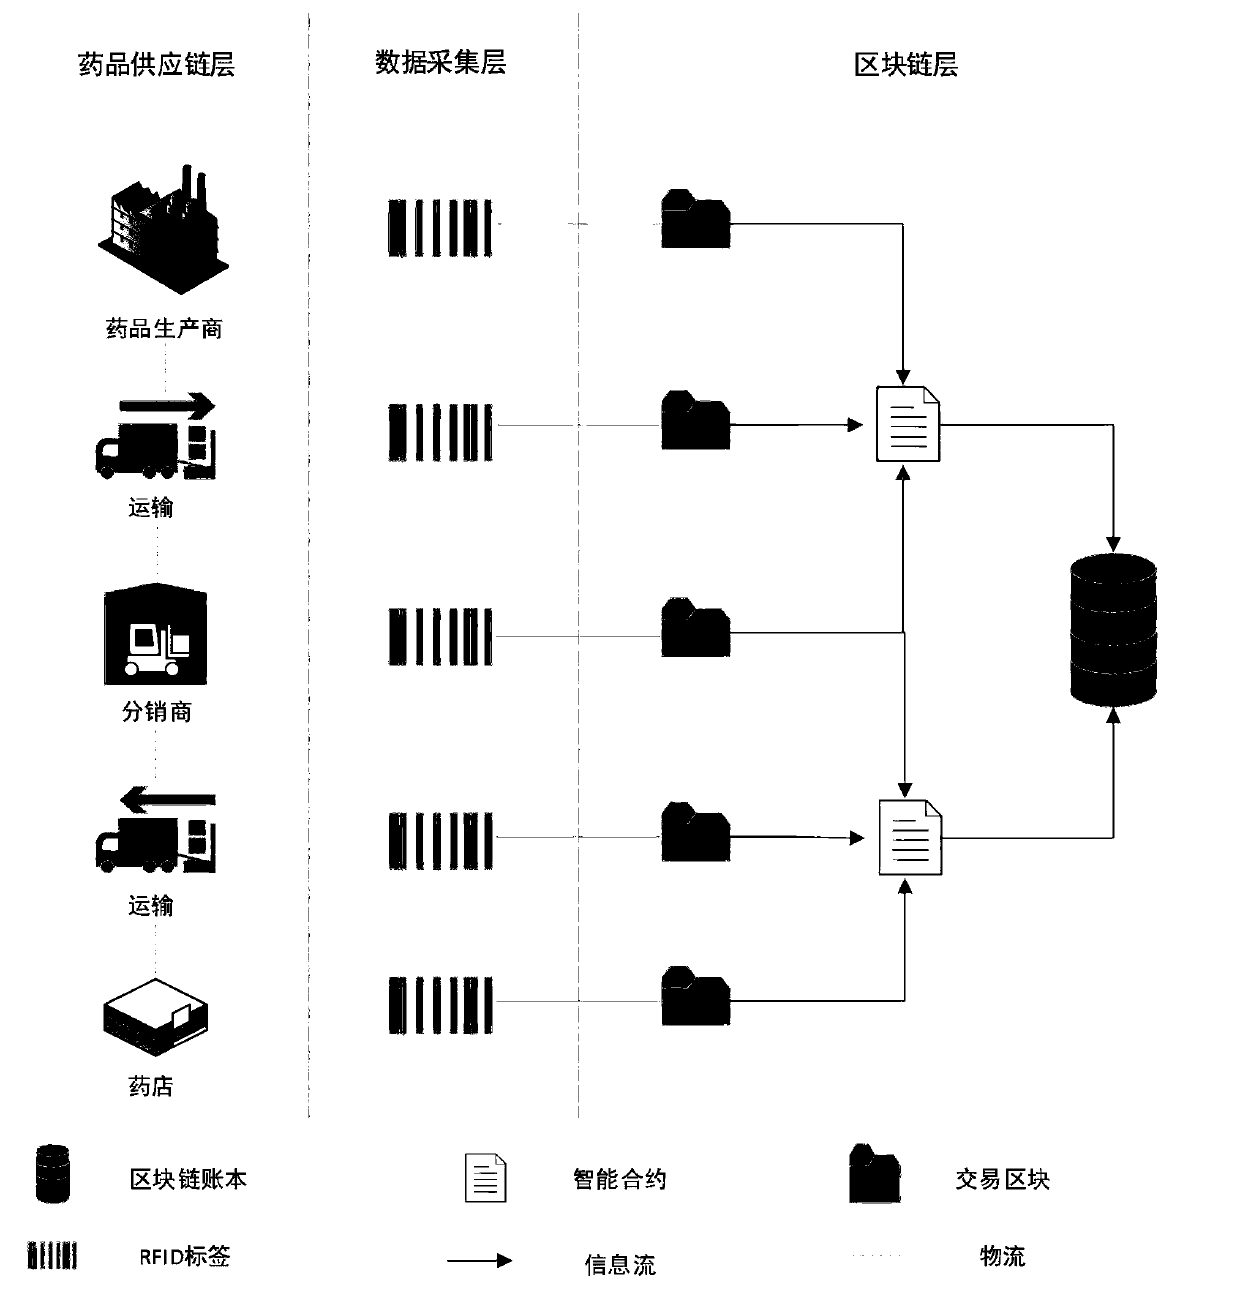 Medicine tracing system based on RFID and block chain and implementation method